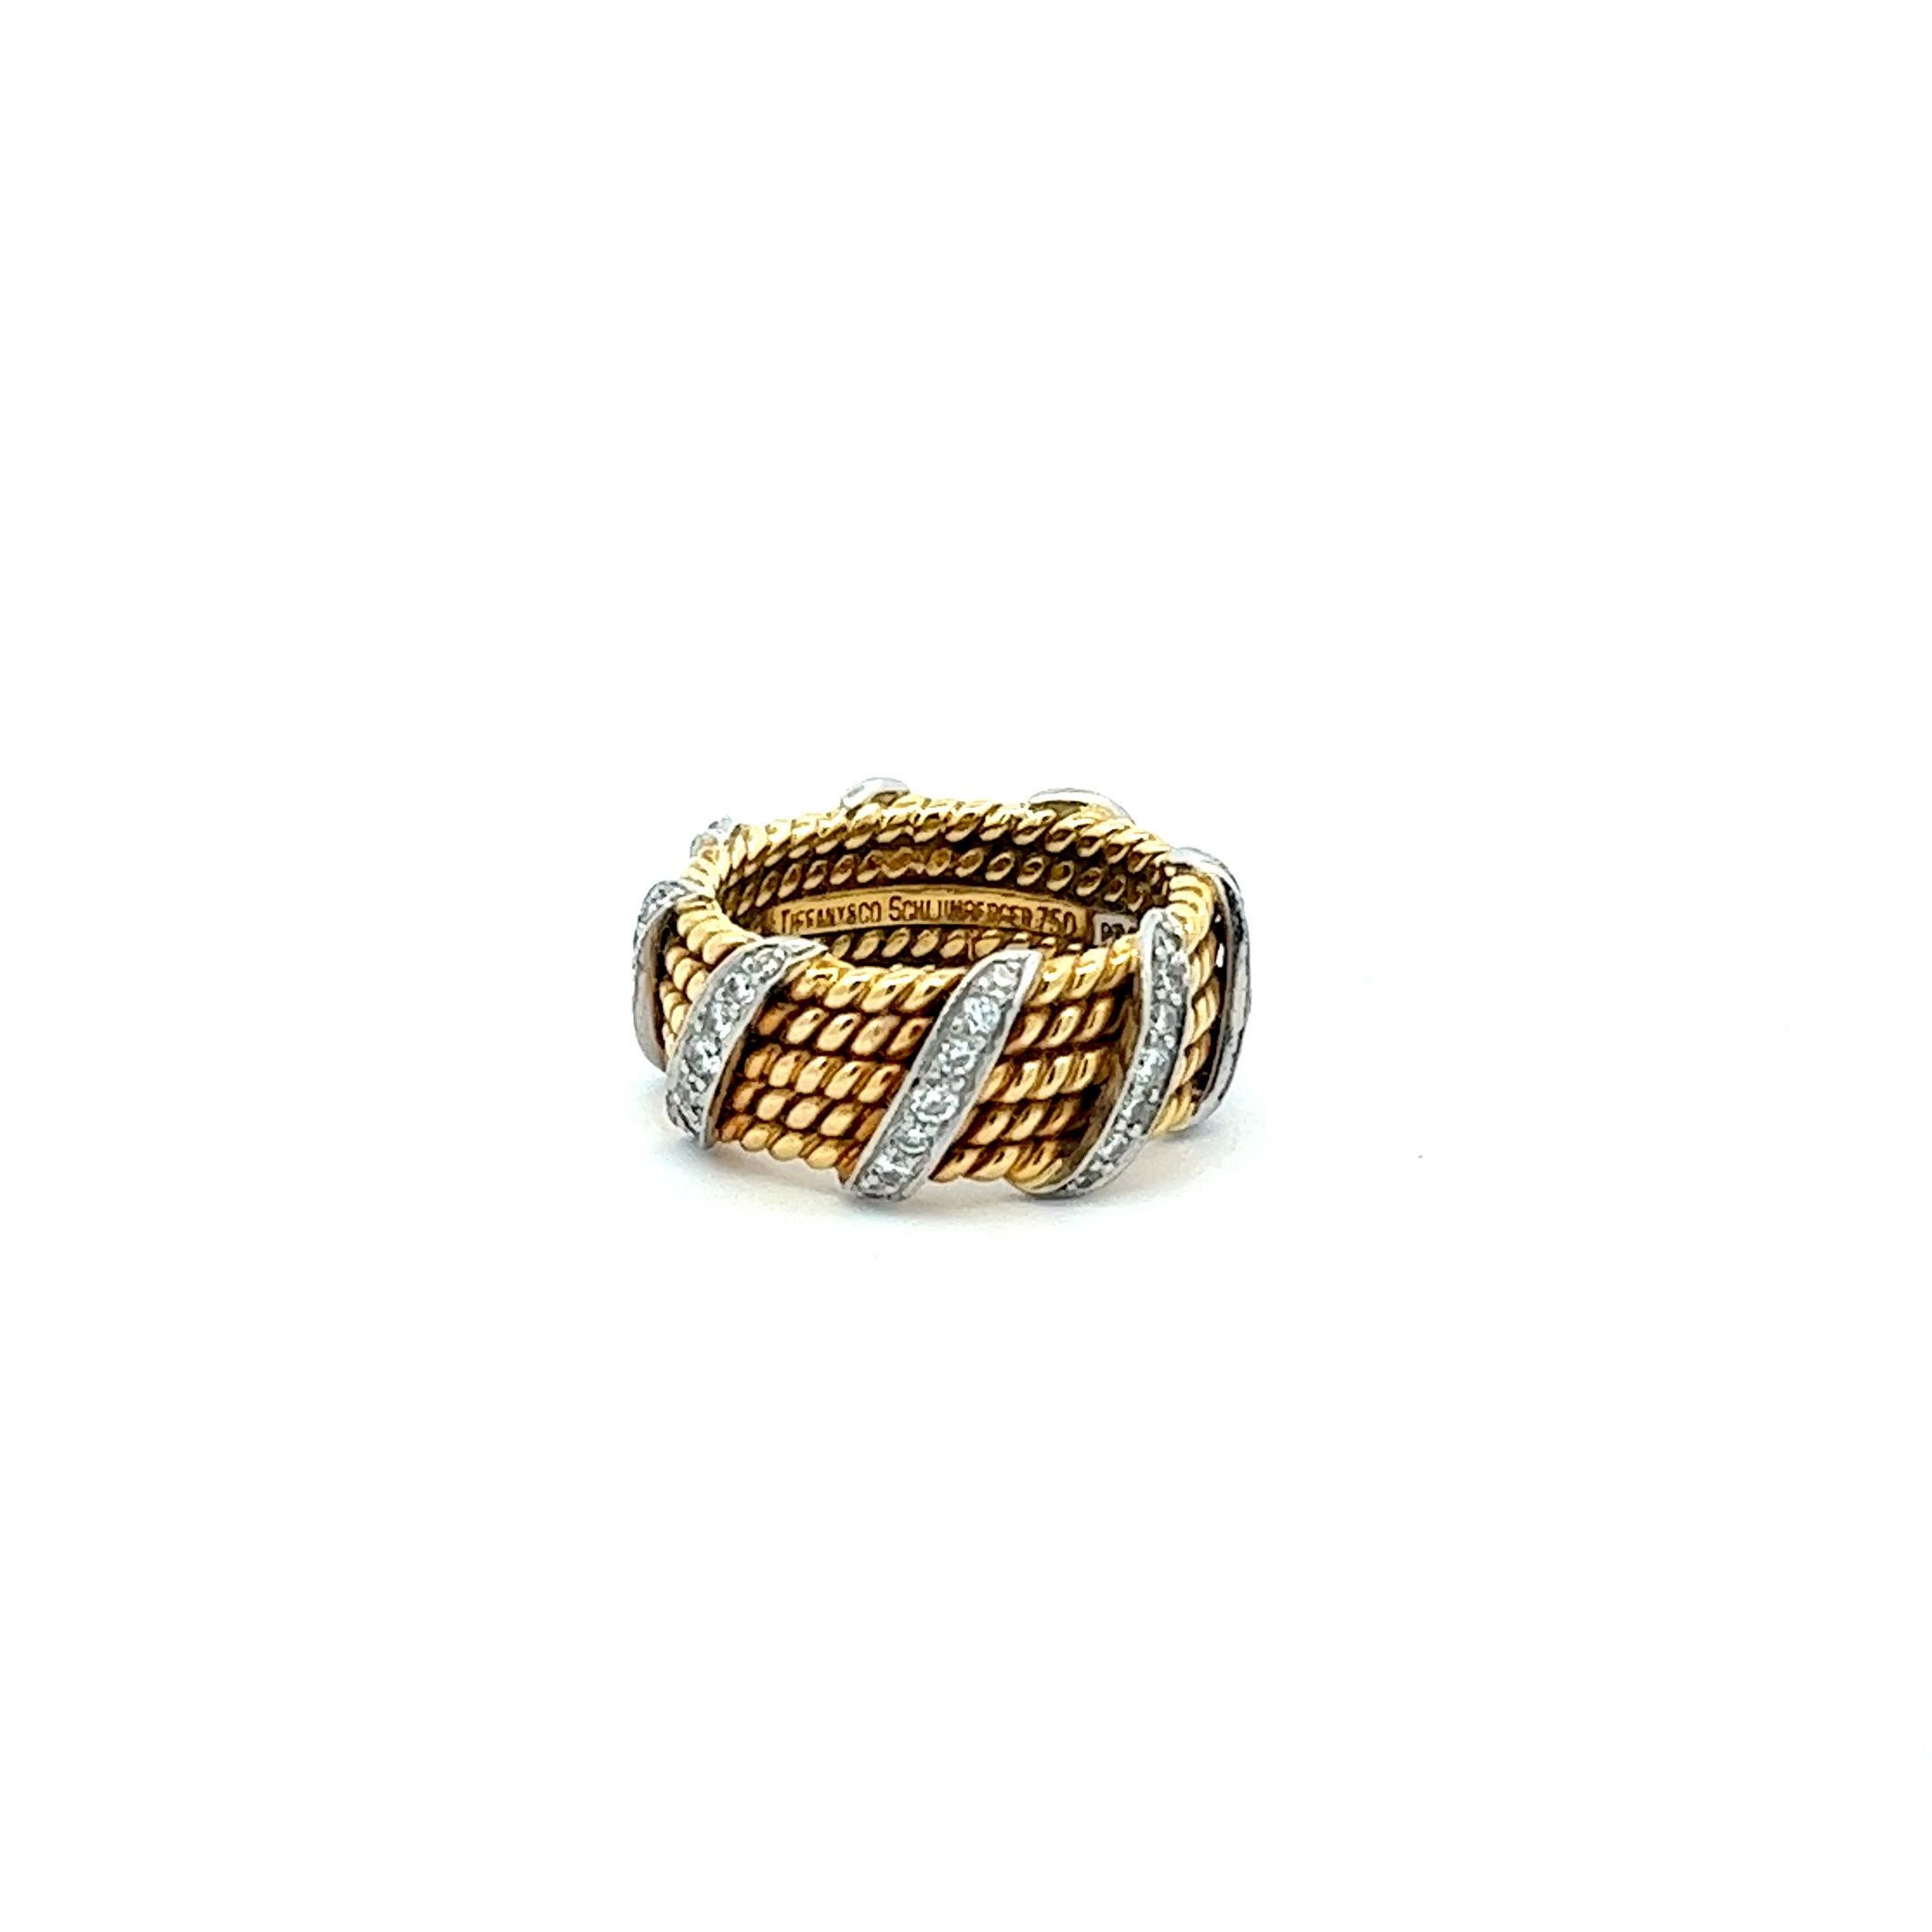 Brilliant Cut Tiffany & Co. Schlumberger 18k Gold, Platinum 5-Row Rope Band Ring with Diamonds